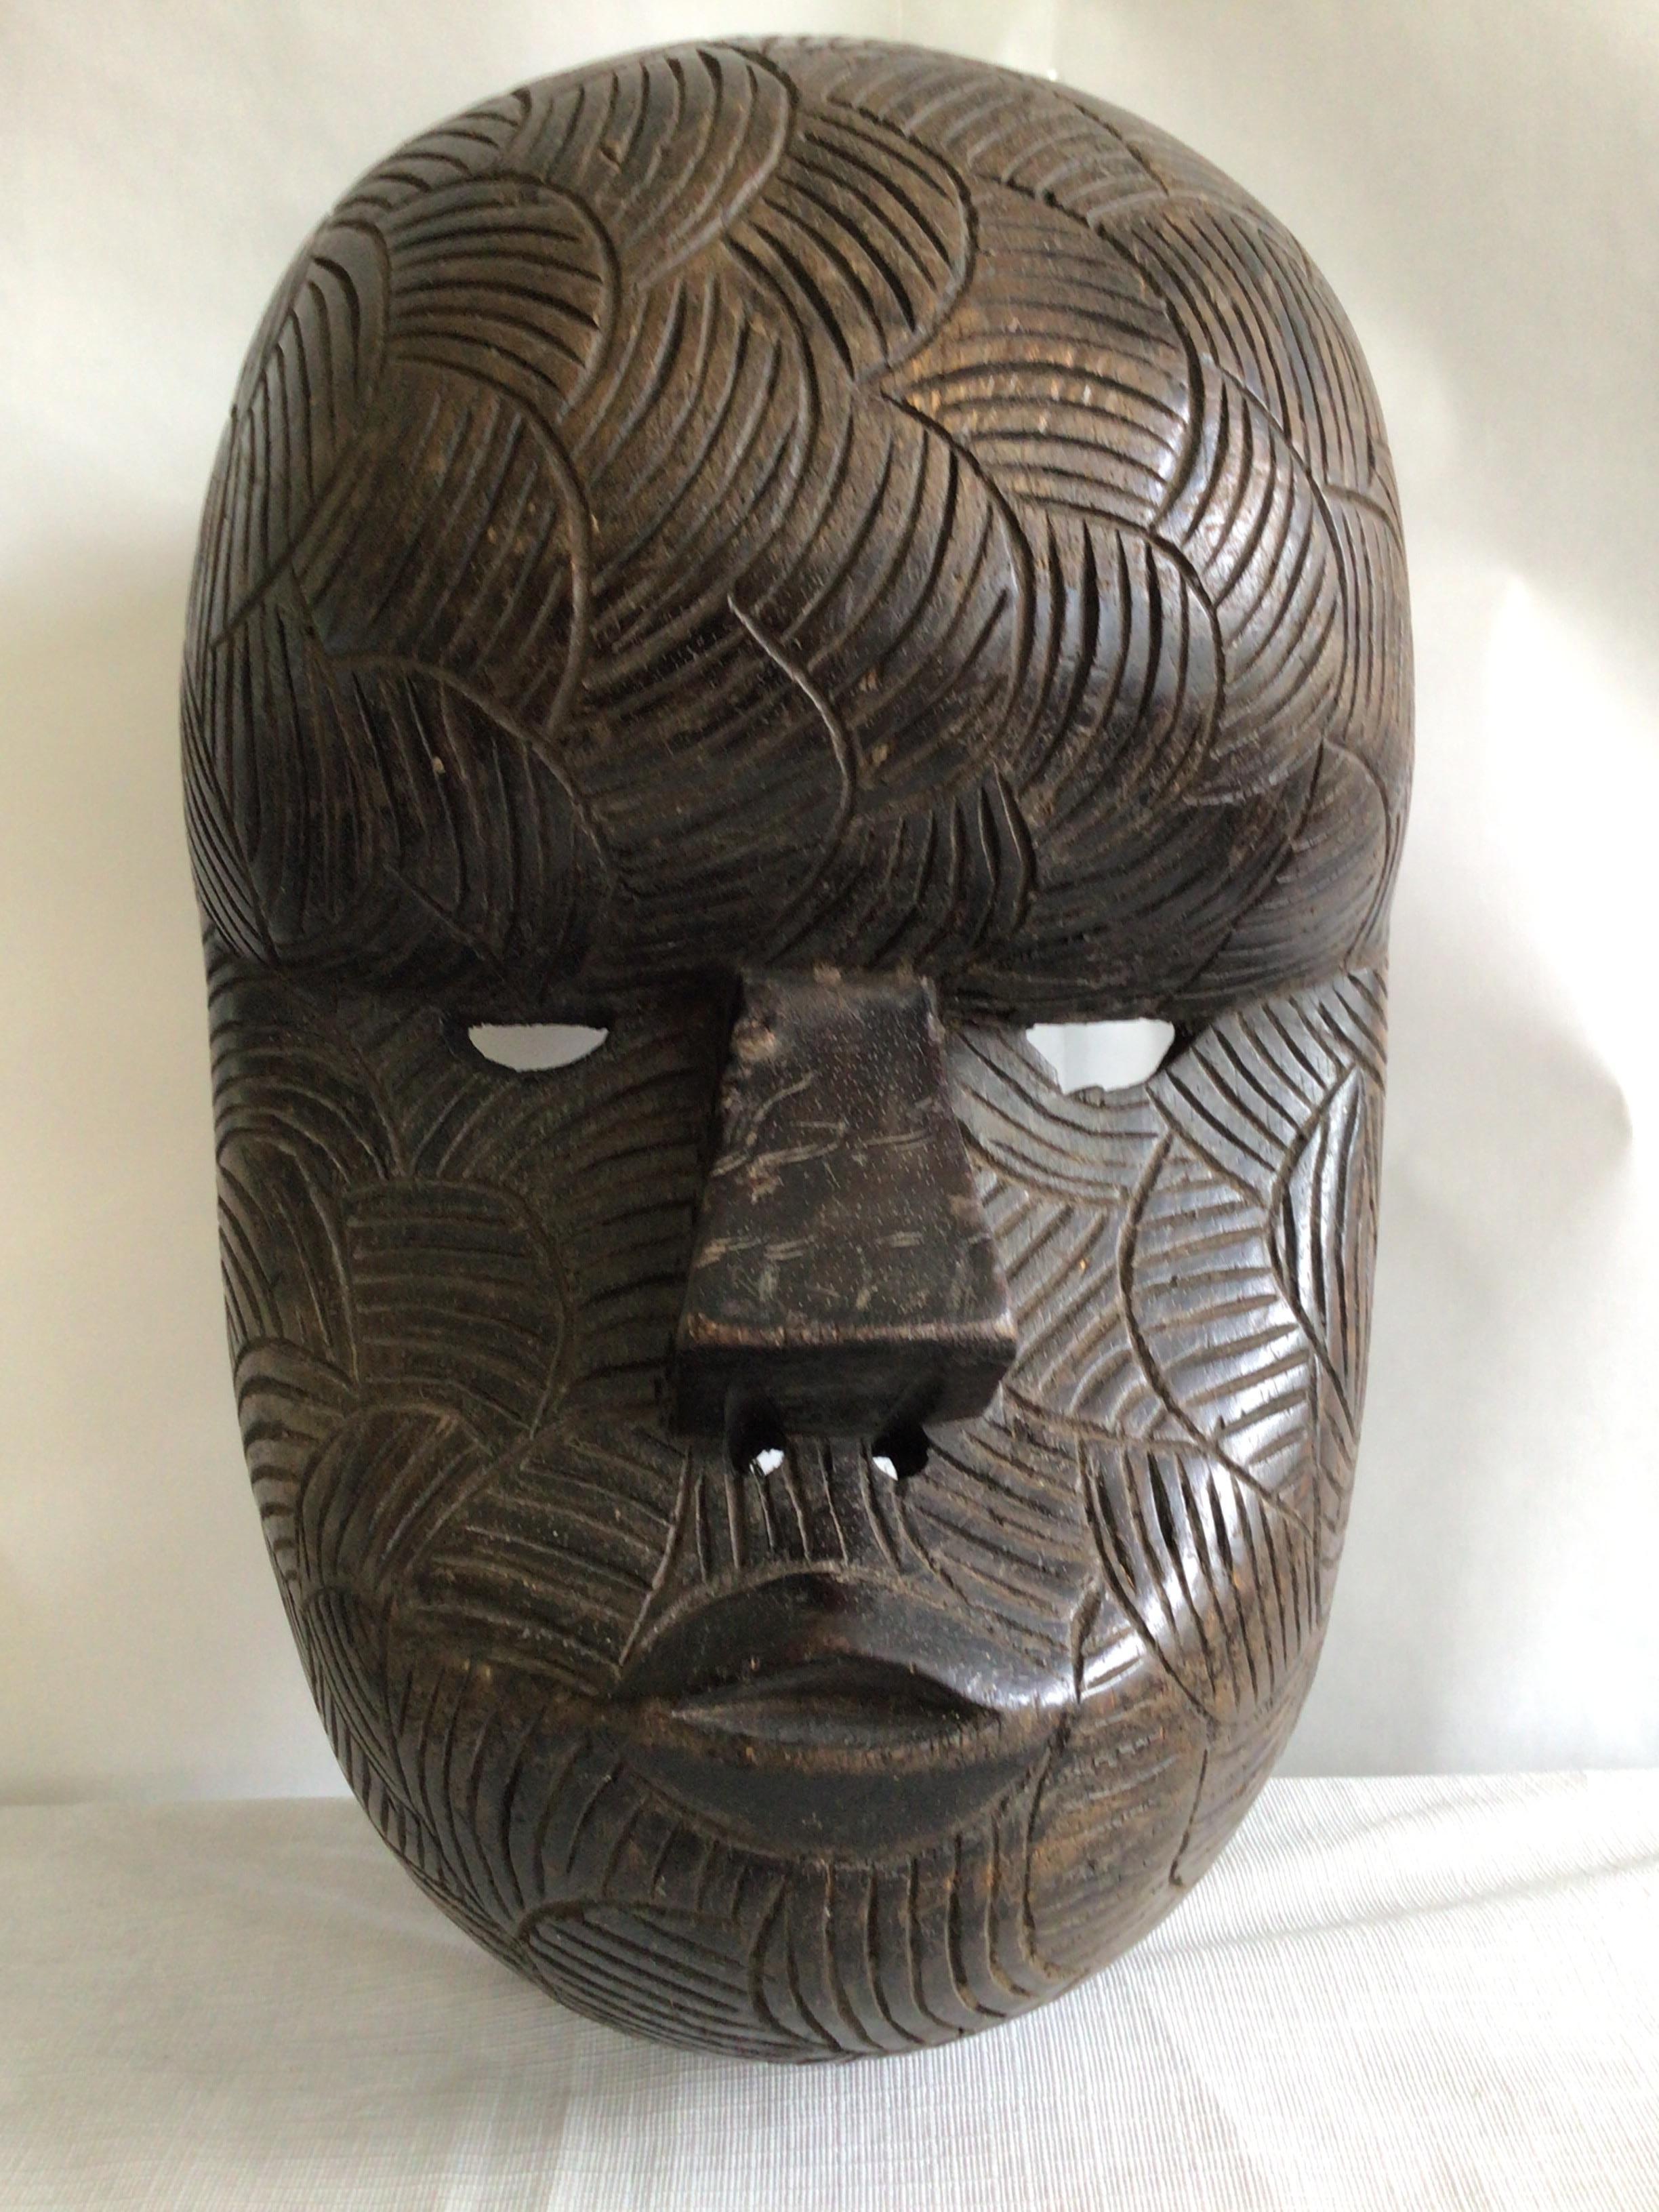 1950s Carved Wood African Mask
Chip in the back as shown